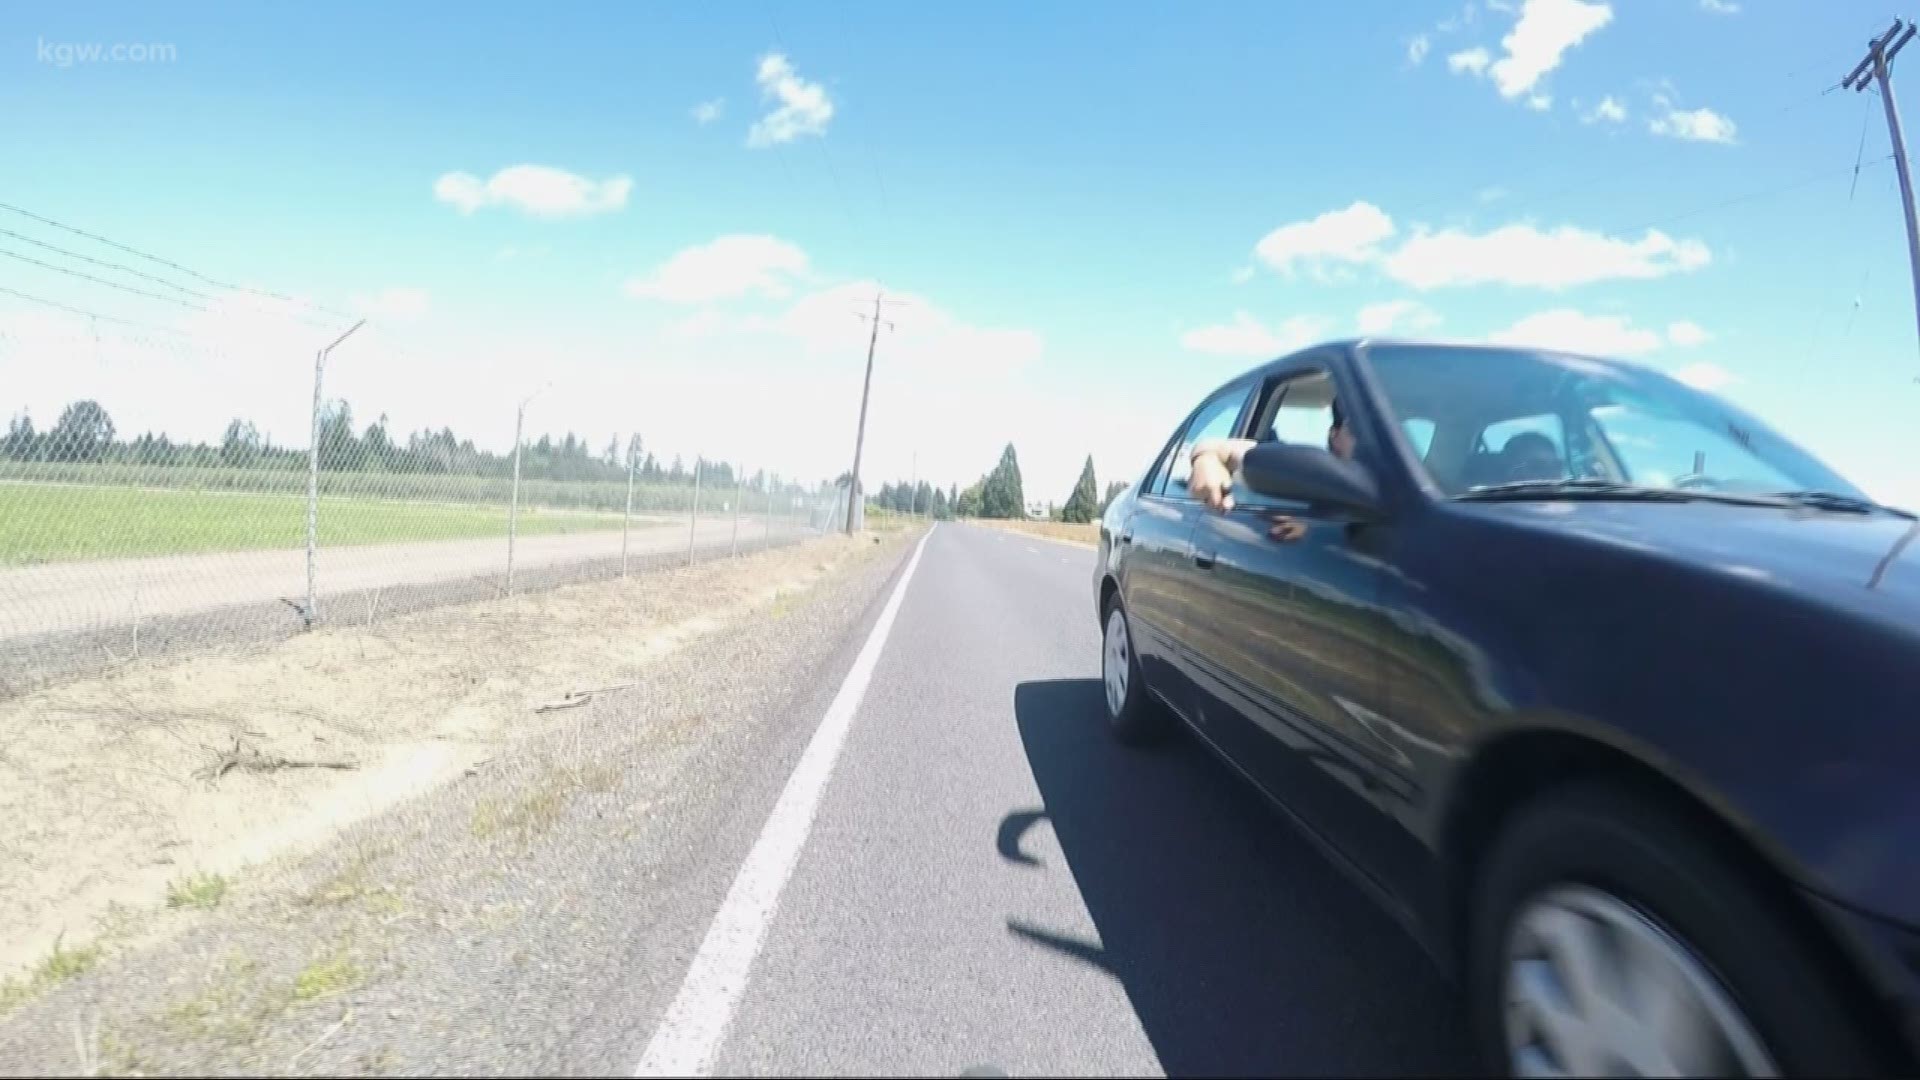 A Hillsboro bicyclist says he was nearly stabbed by a passenger in a passing car while on a ride in rural Washington County on Saturday afternoon.